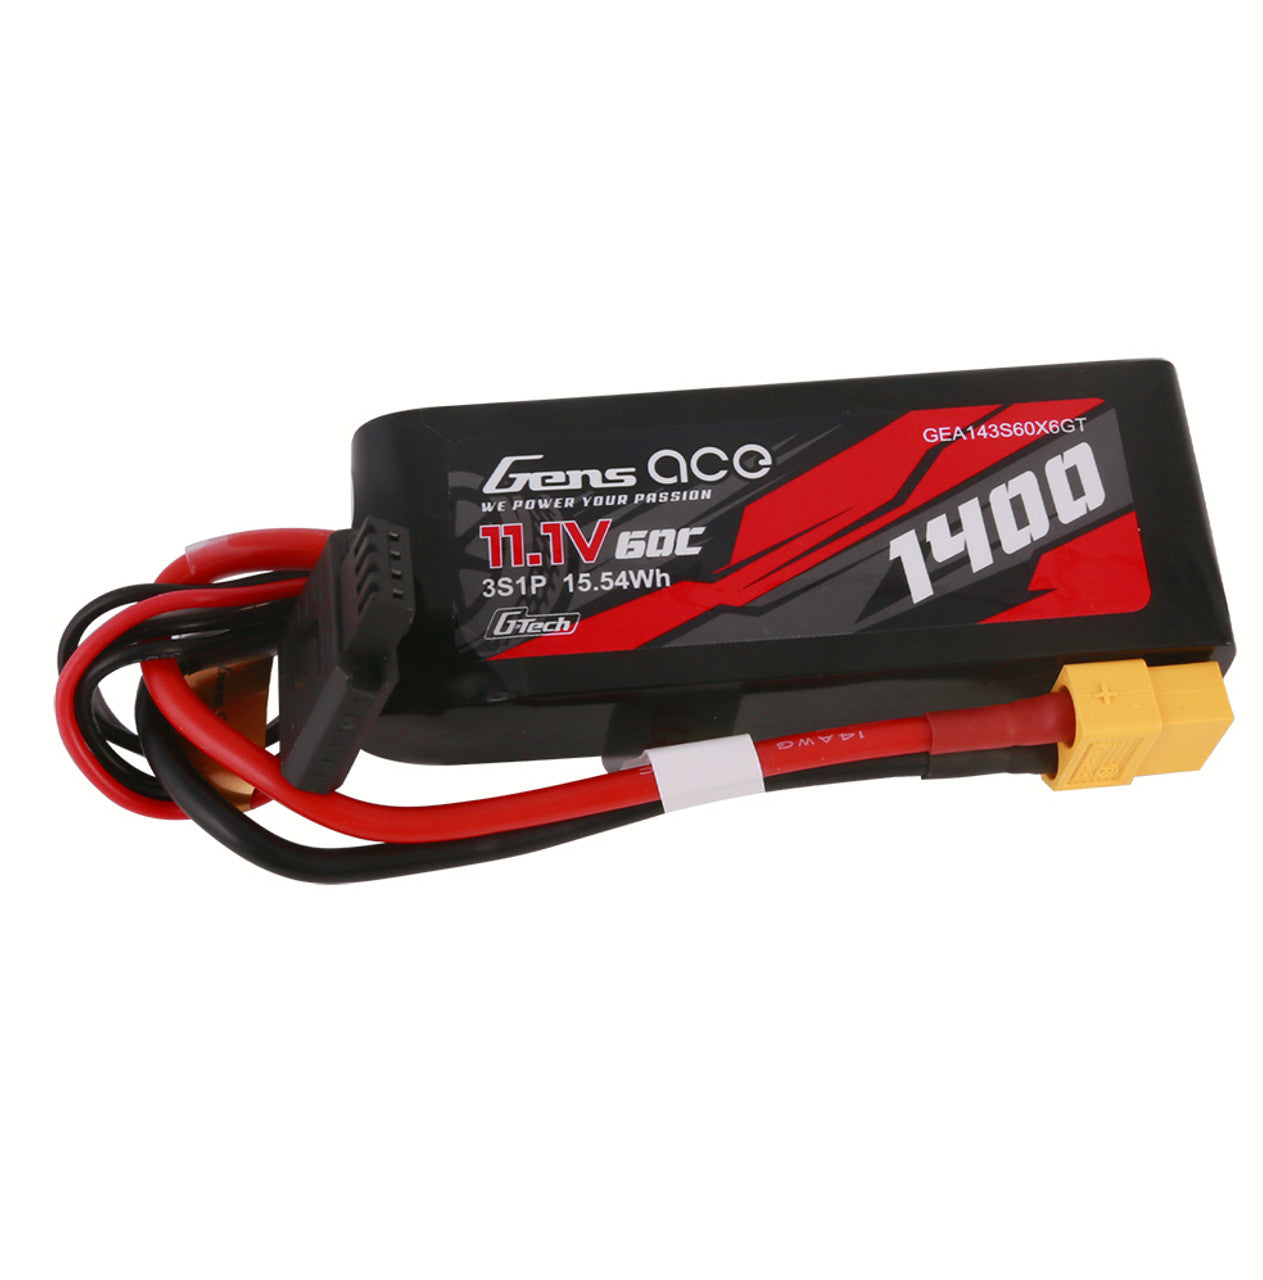 GEA143S60X6GT Gens Ace 1400mAh 11.1V 60C 3S1P G-Tech Lipo Battery Pack With XT60 Plug